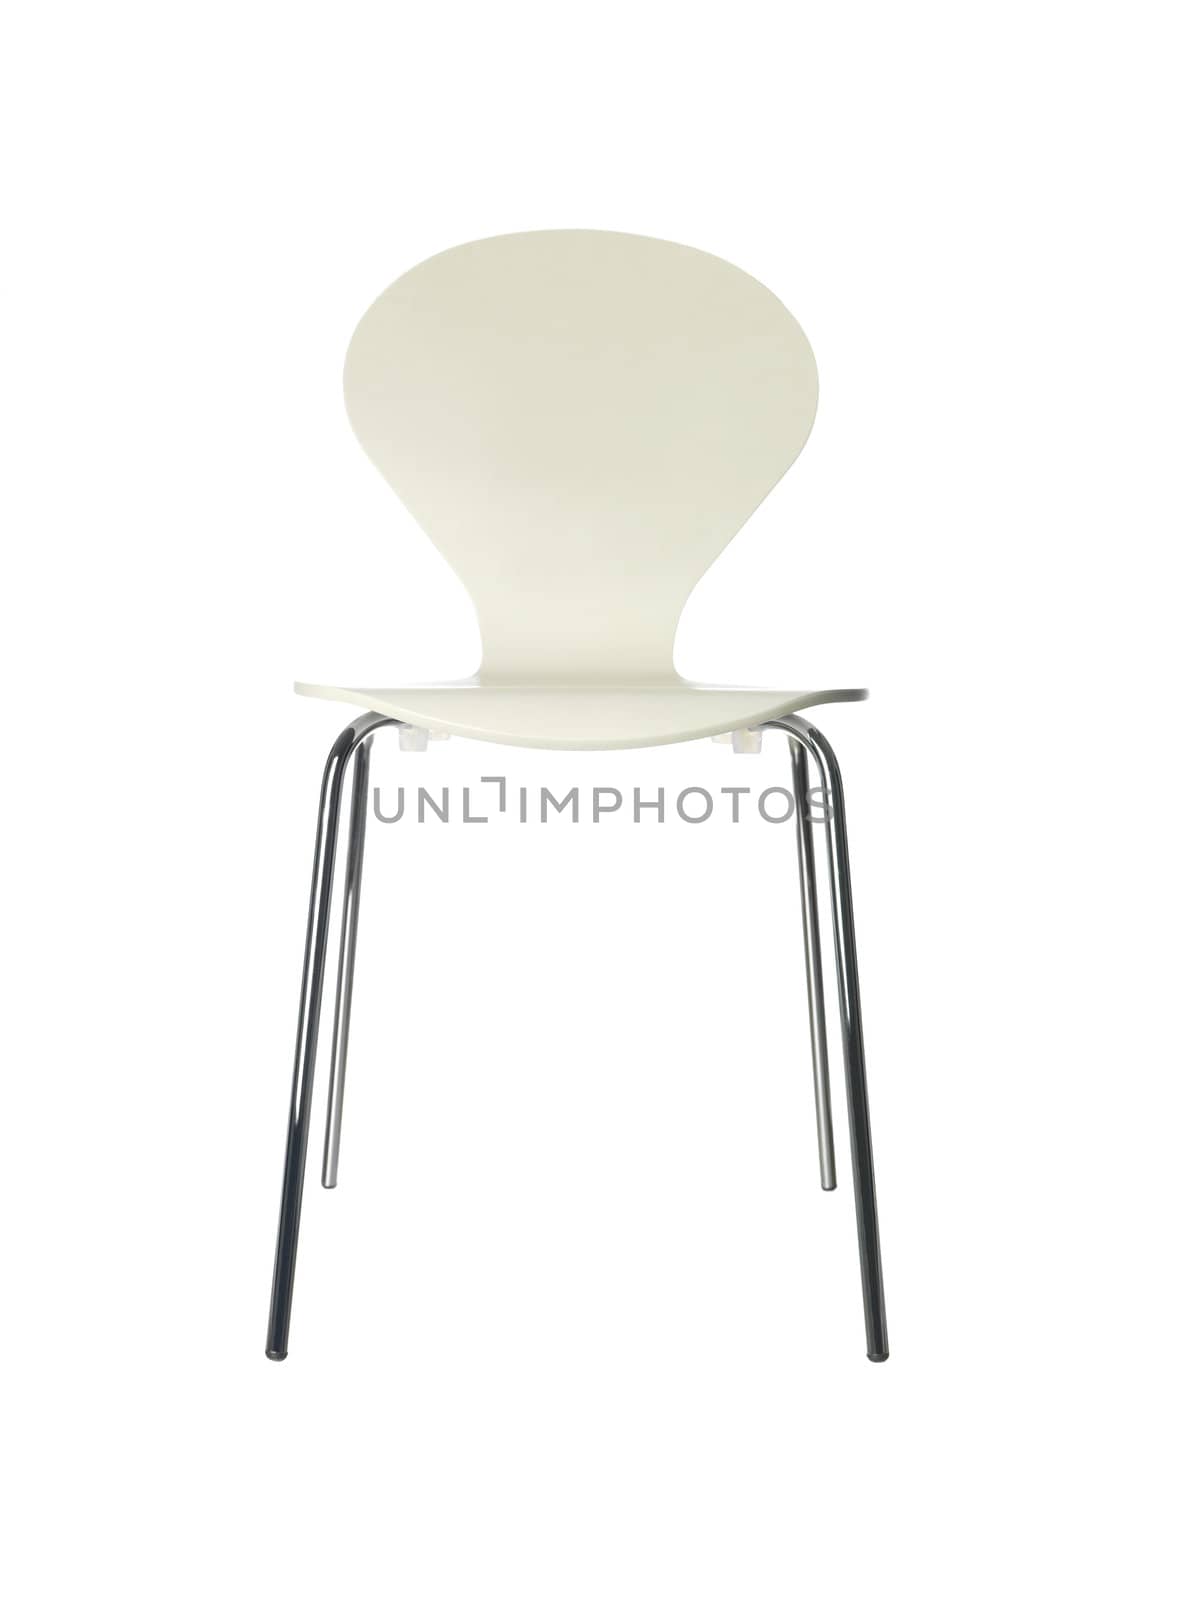 chair against white background by gemenacom